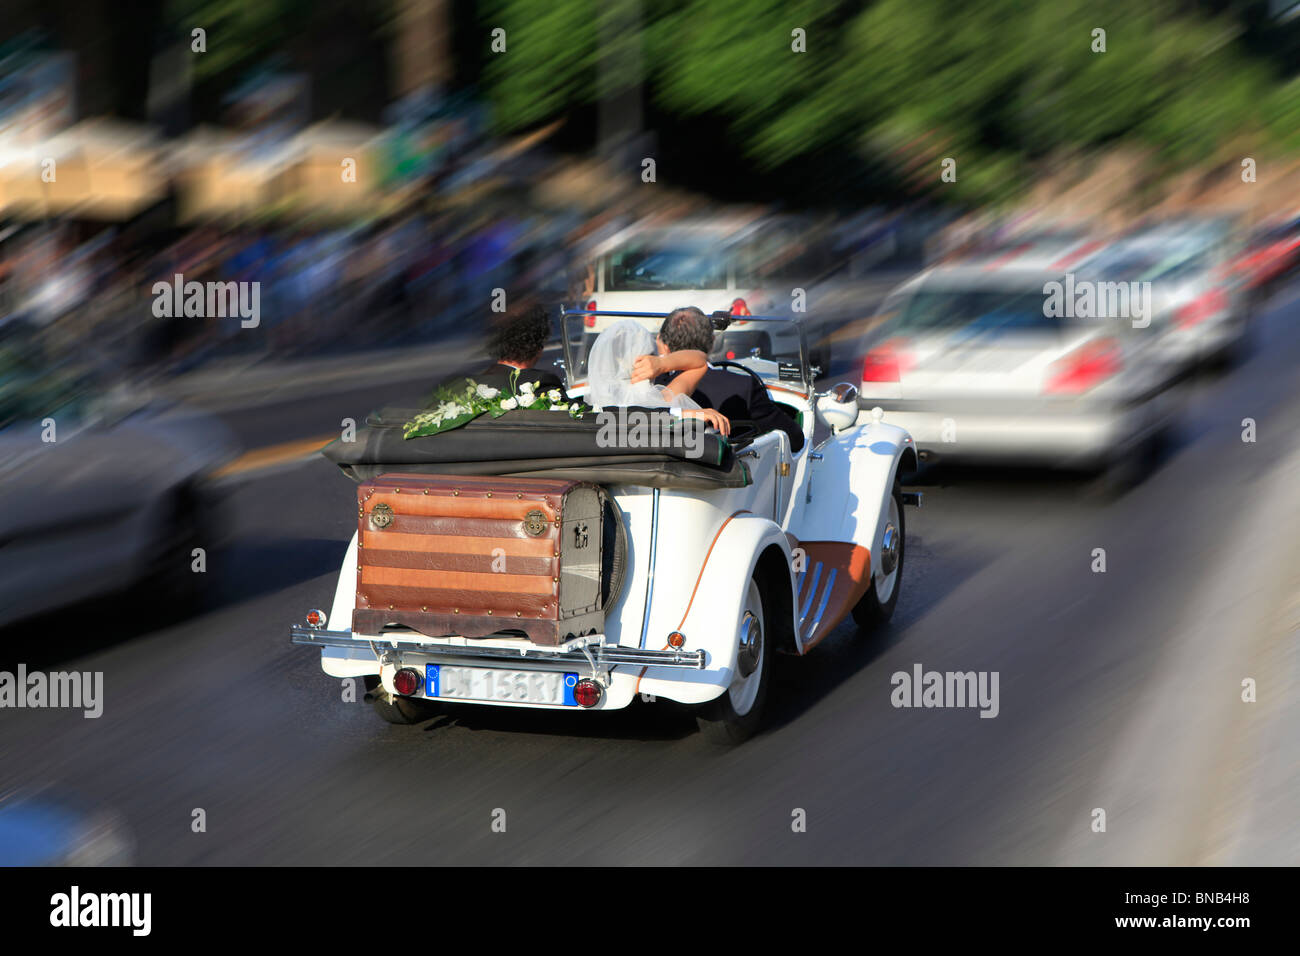 Newly wed couple speed through city in open top sports car Stock Photo